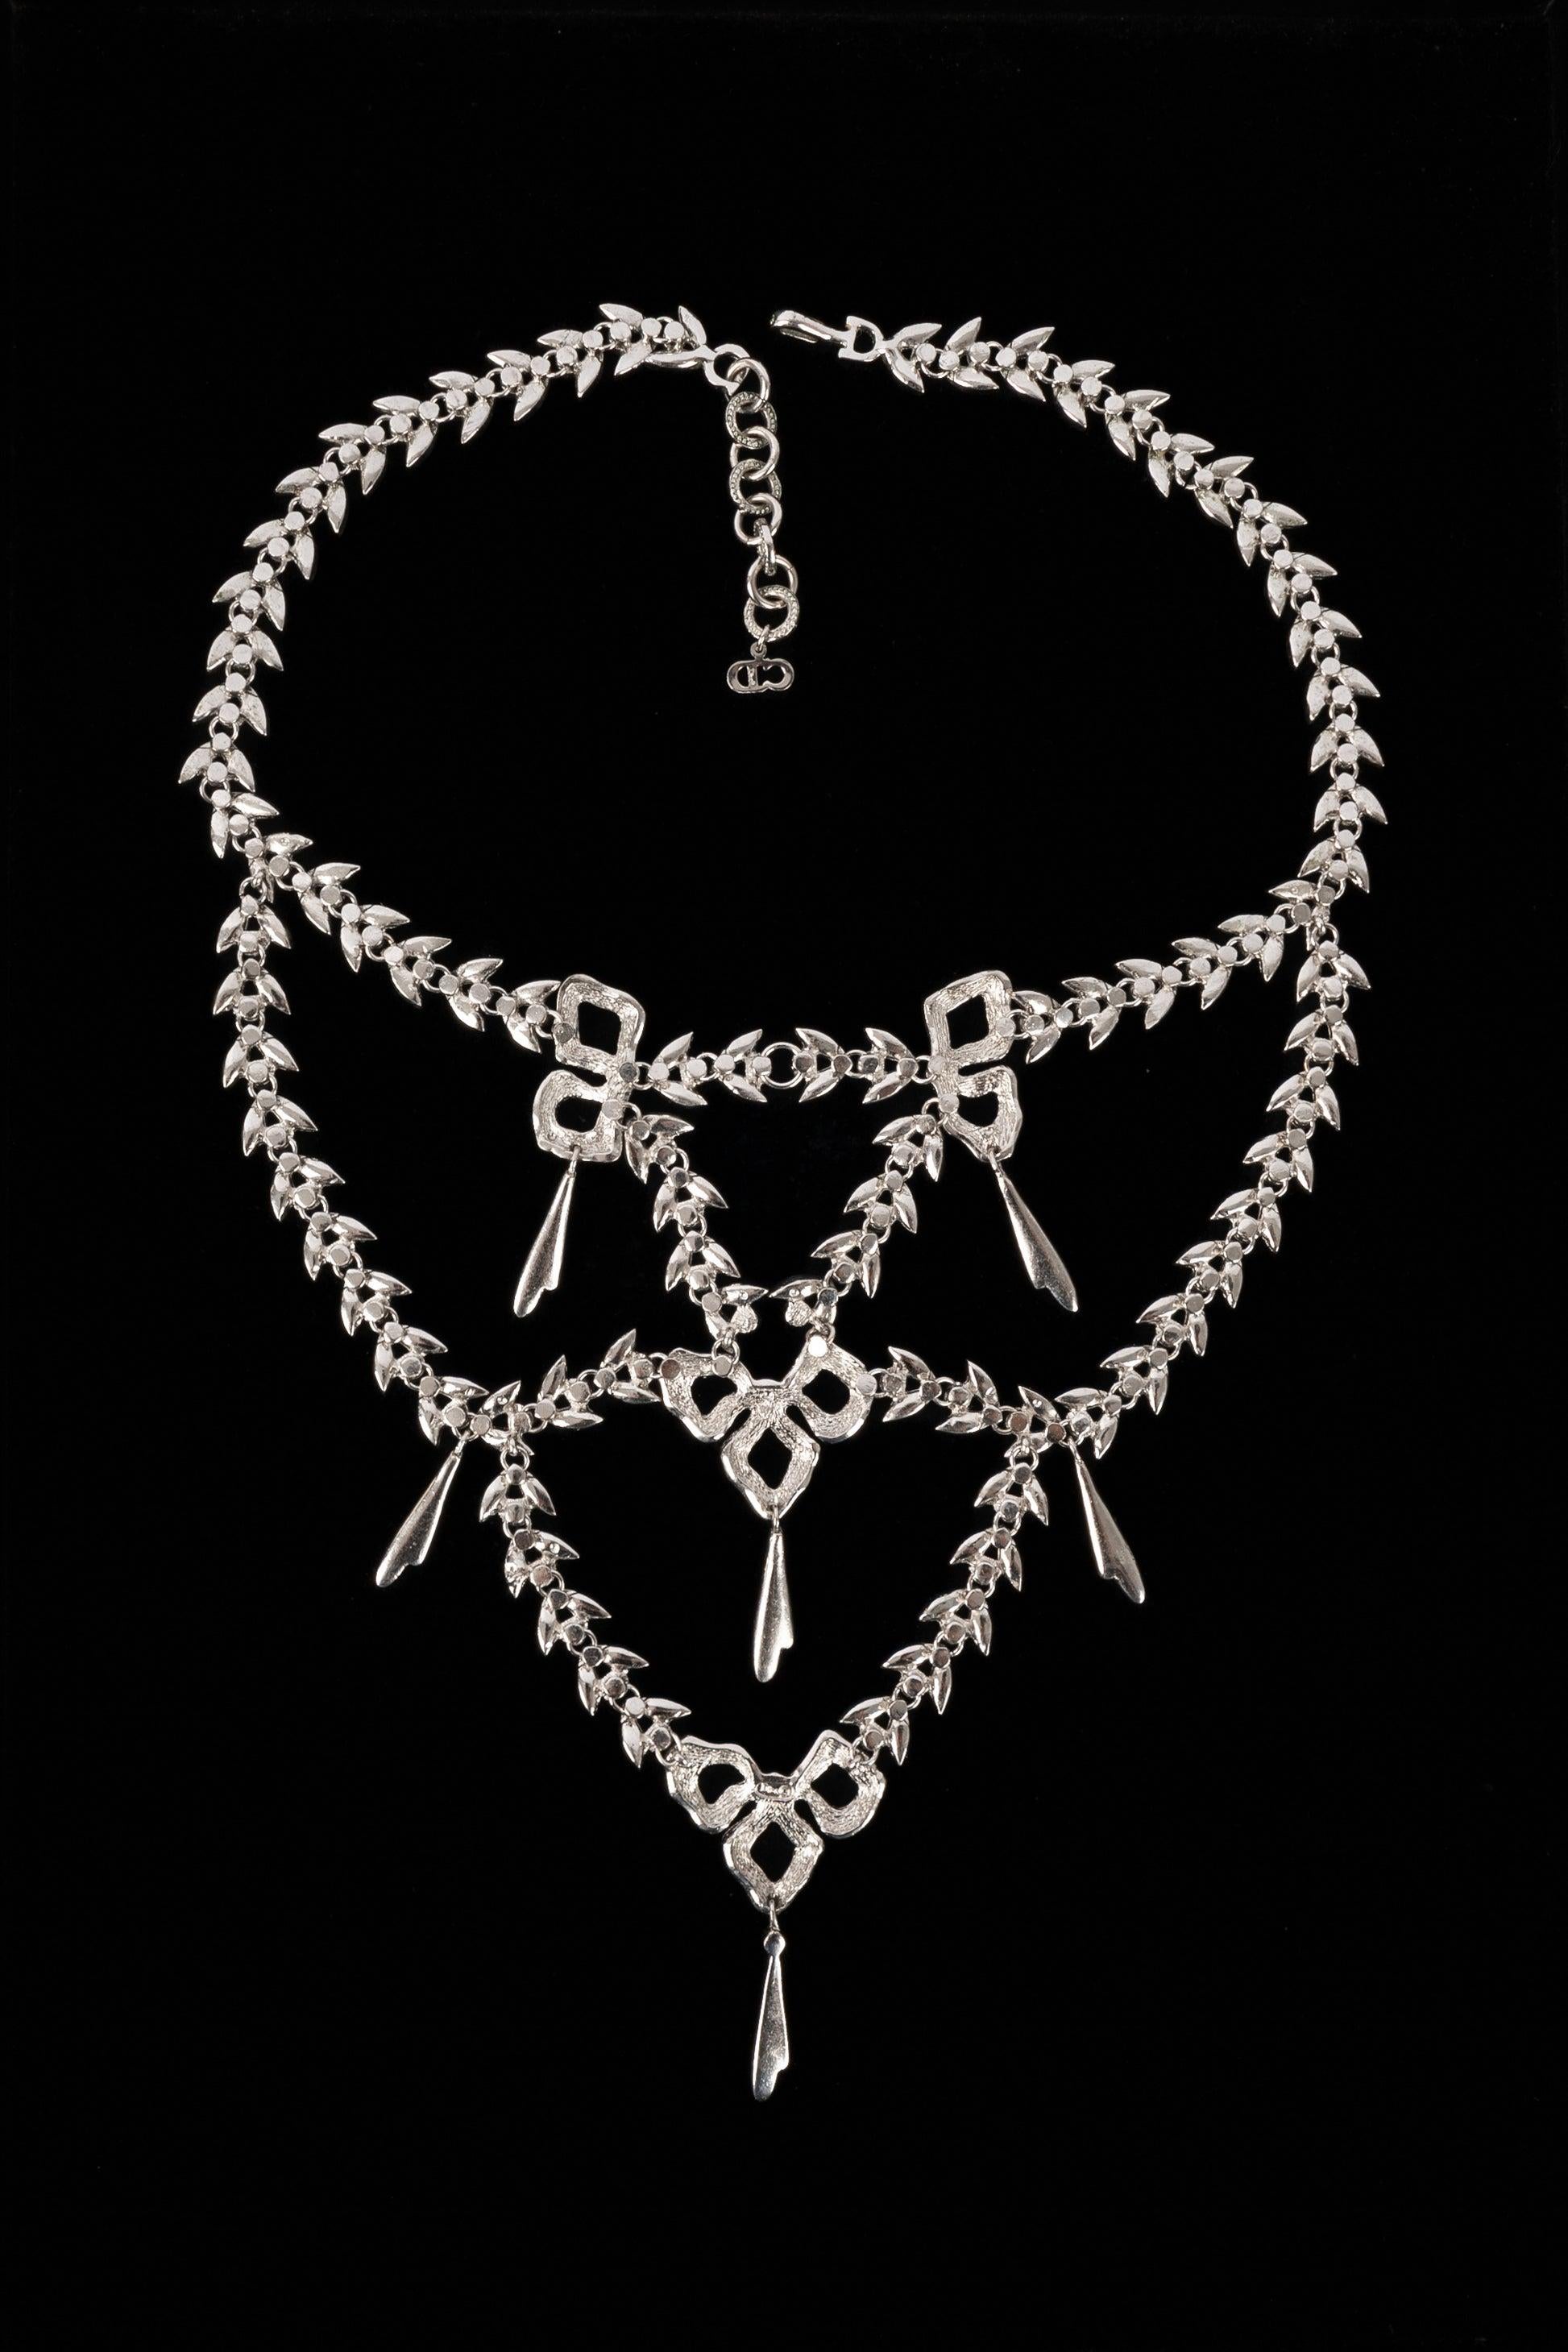 Dior - (Made in France) Silvery metal dickey necklace with Swarovski rhinestones. 2001 Fall Collection under the artistic direction of John Galliano.

Additional information: 
Condition: Very good condition
Dimensions: Length: 45 cm
Period: 21st